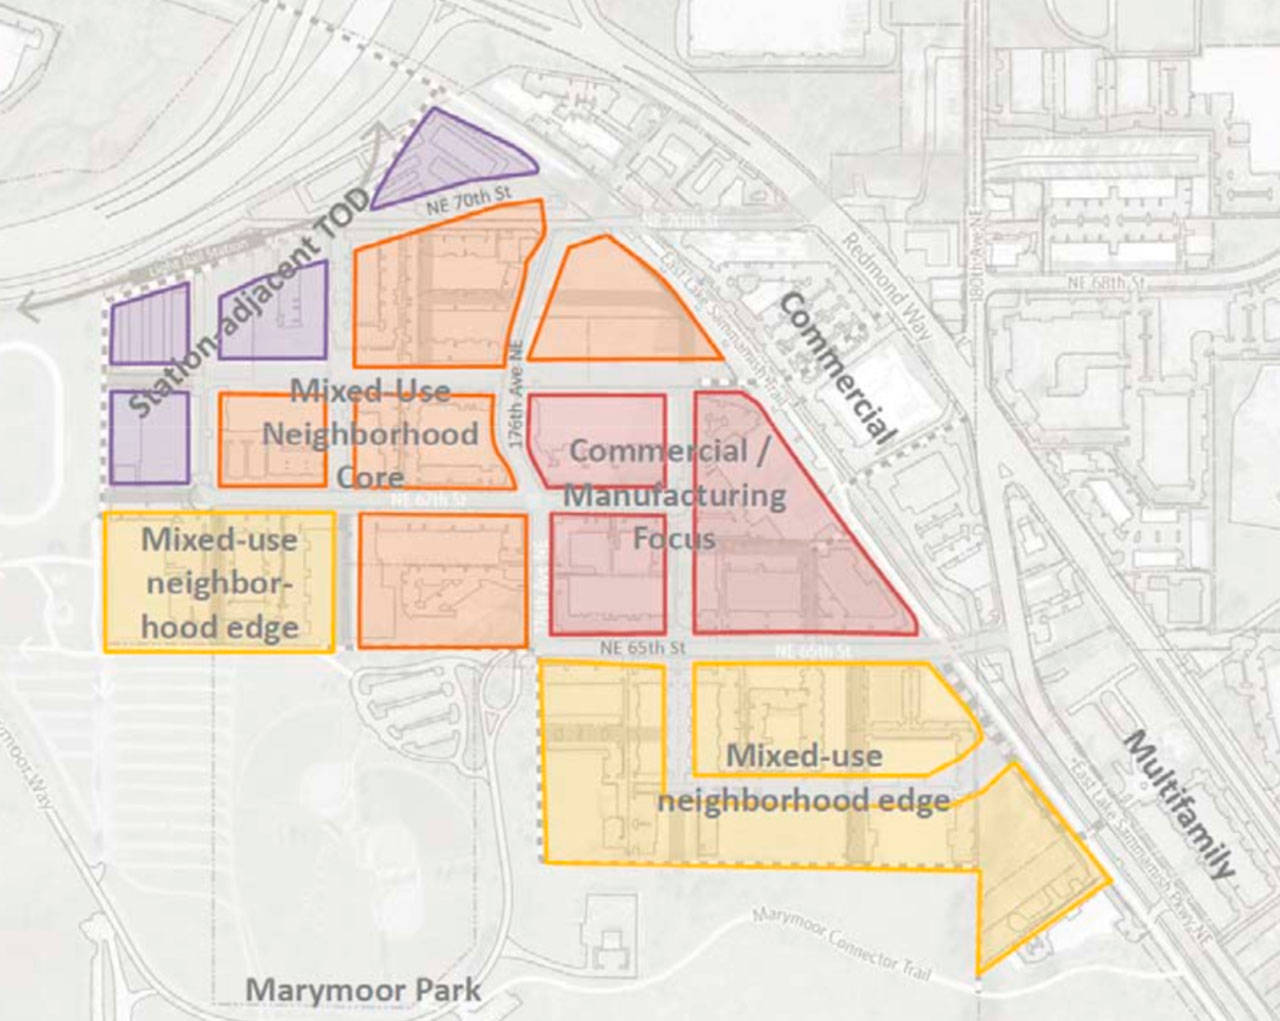 The city’s plans for Redmond’s southeast neighborhood include increased residential living spaces near Marymoor Park and a Sound Transit East Link Light Rail station parallel to WA-520. Courtesy of Redmond City Council Infrastructure Planning Report 2017